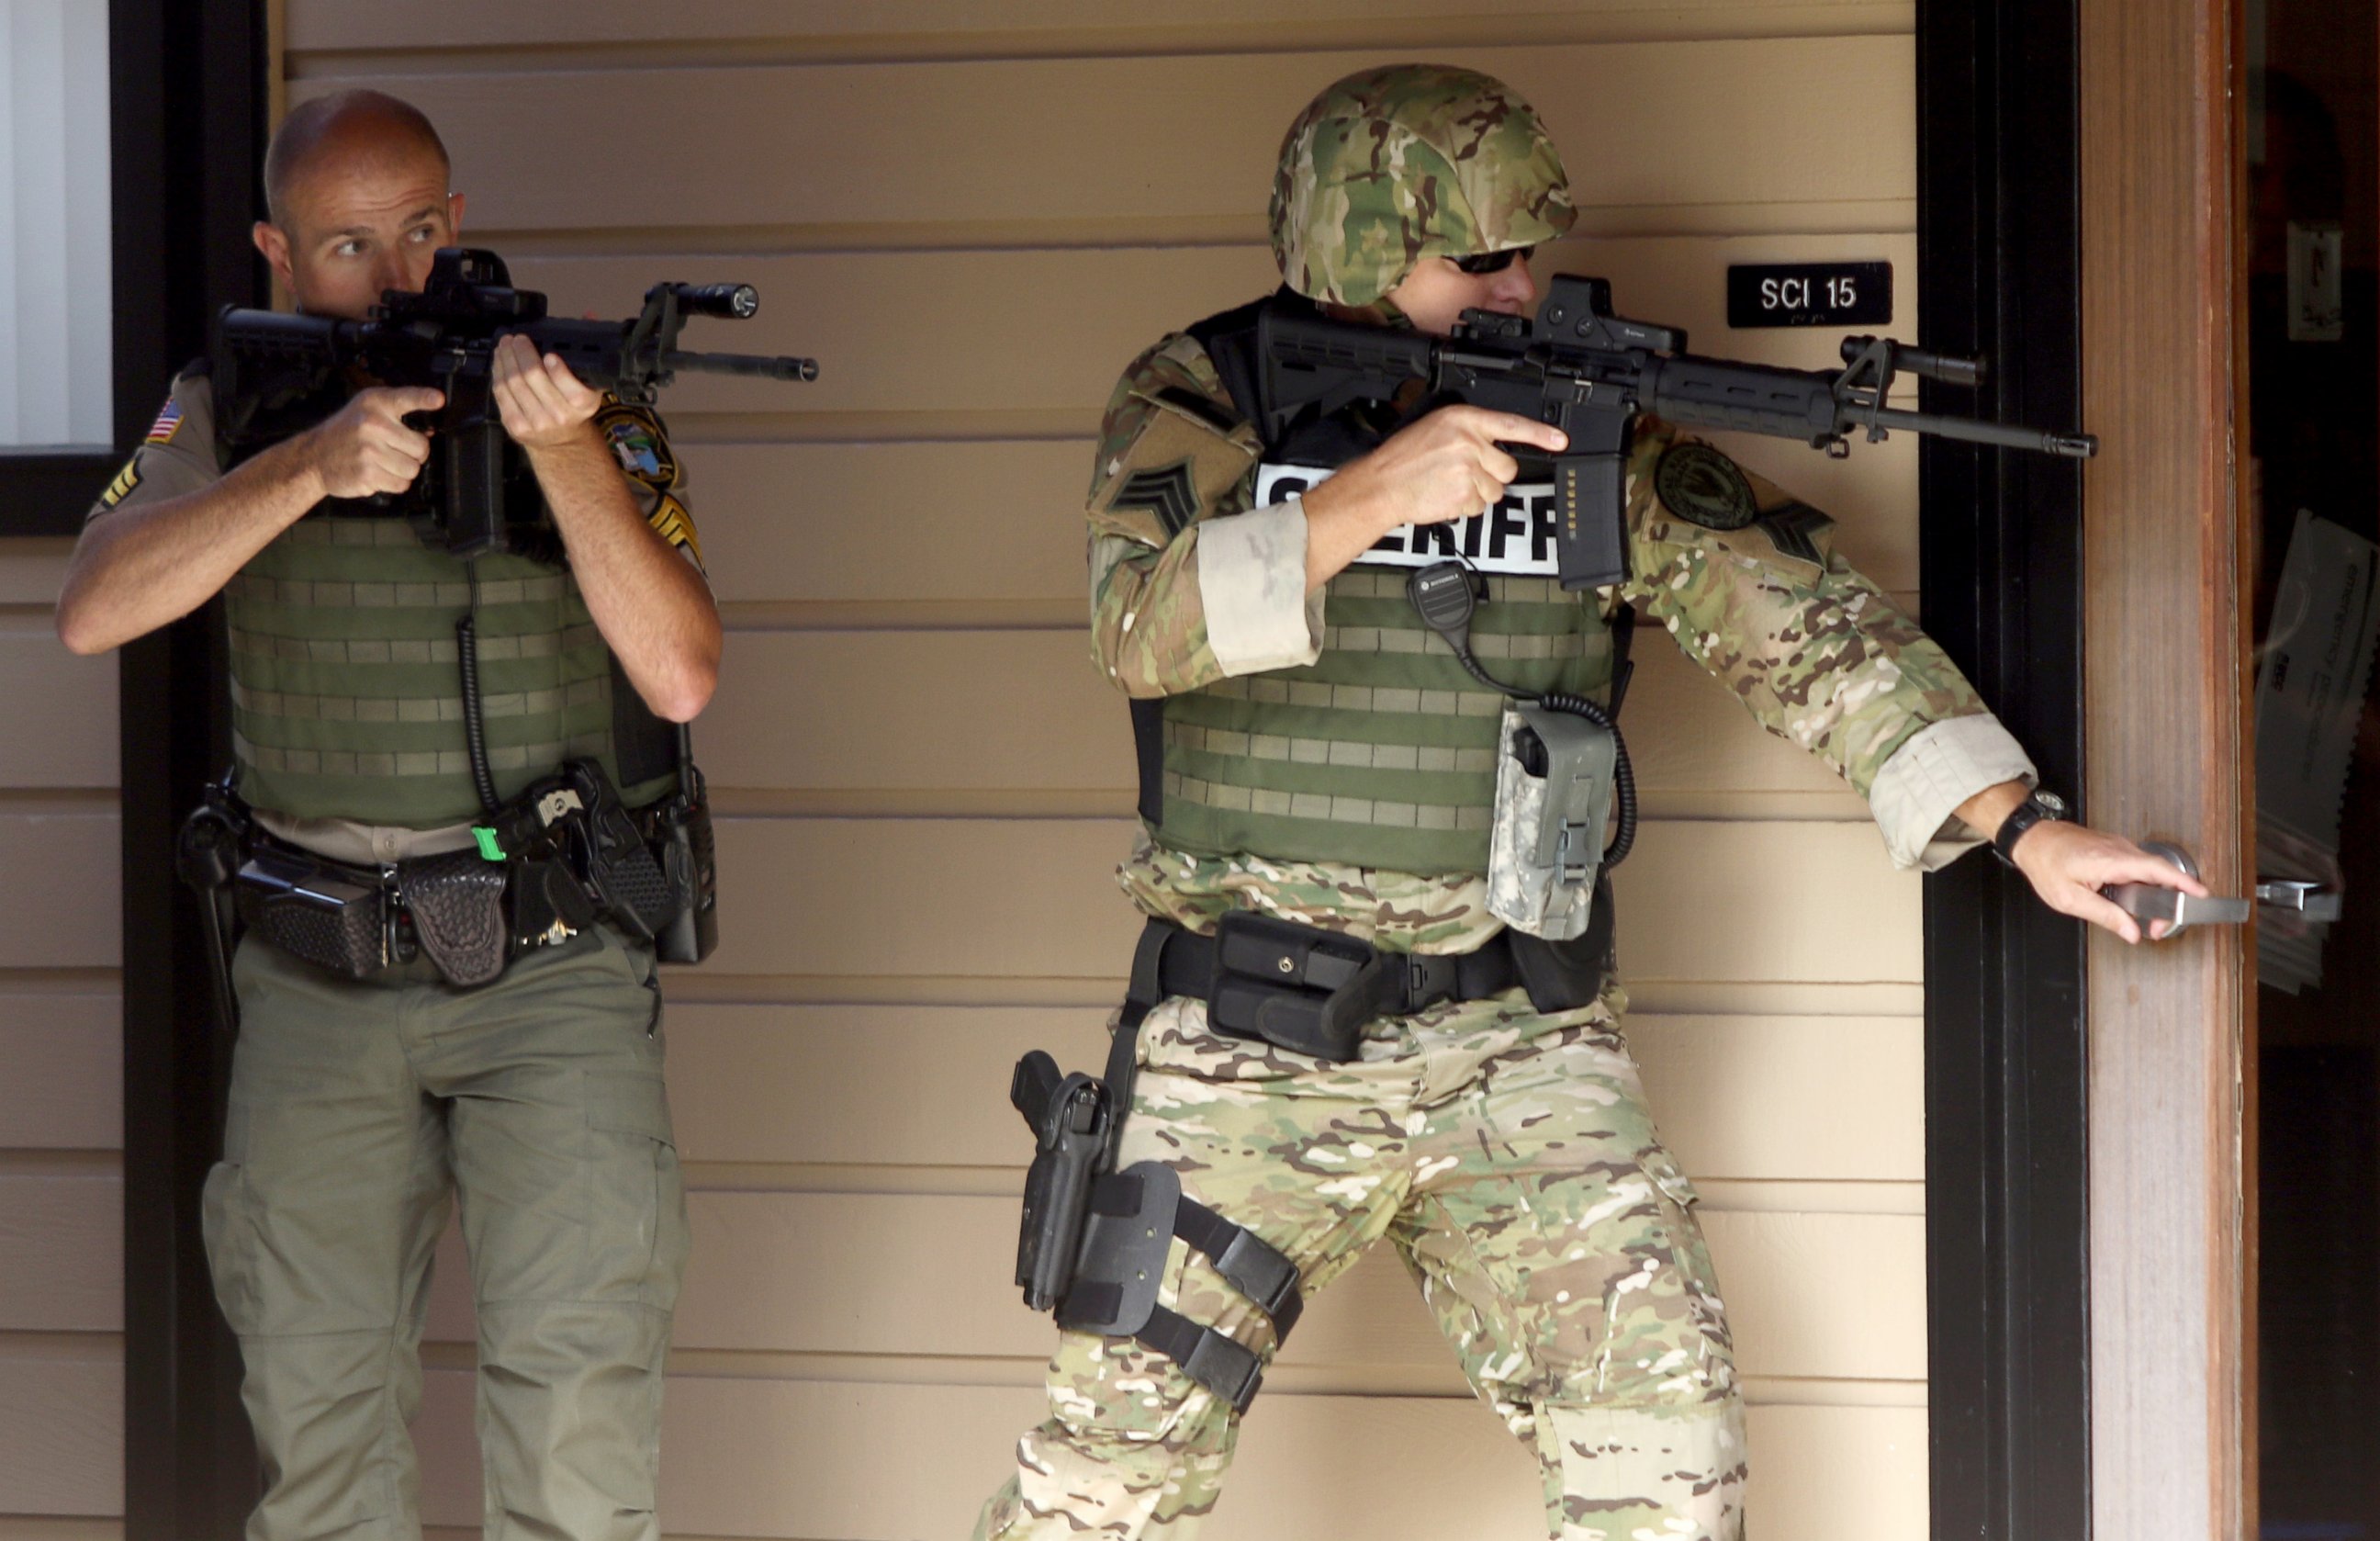 PHOTO: Authorities respond to a report of a shooting at Umpqua Community College in Roseburg, Ore., Oct. 1, 2015.